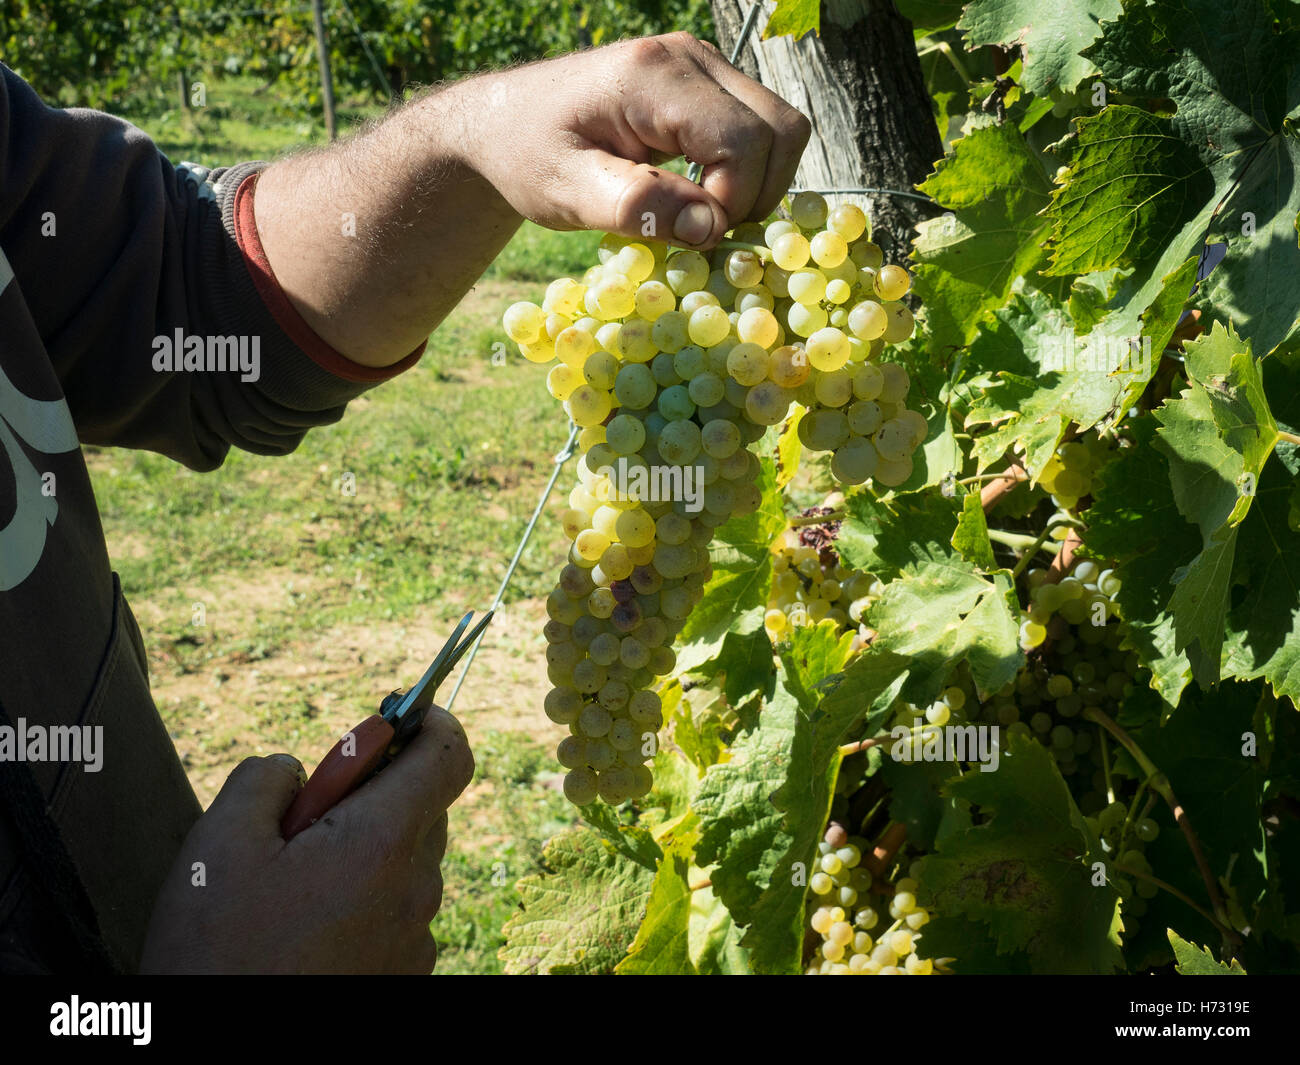 Manual harvesting. With the help of his pruning shears, the picker cuts a bunch of grapes. Stock Photo